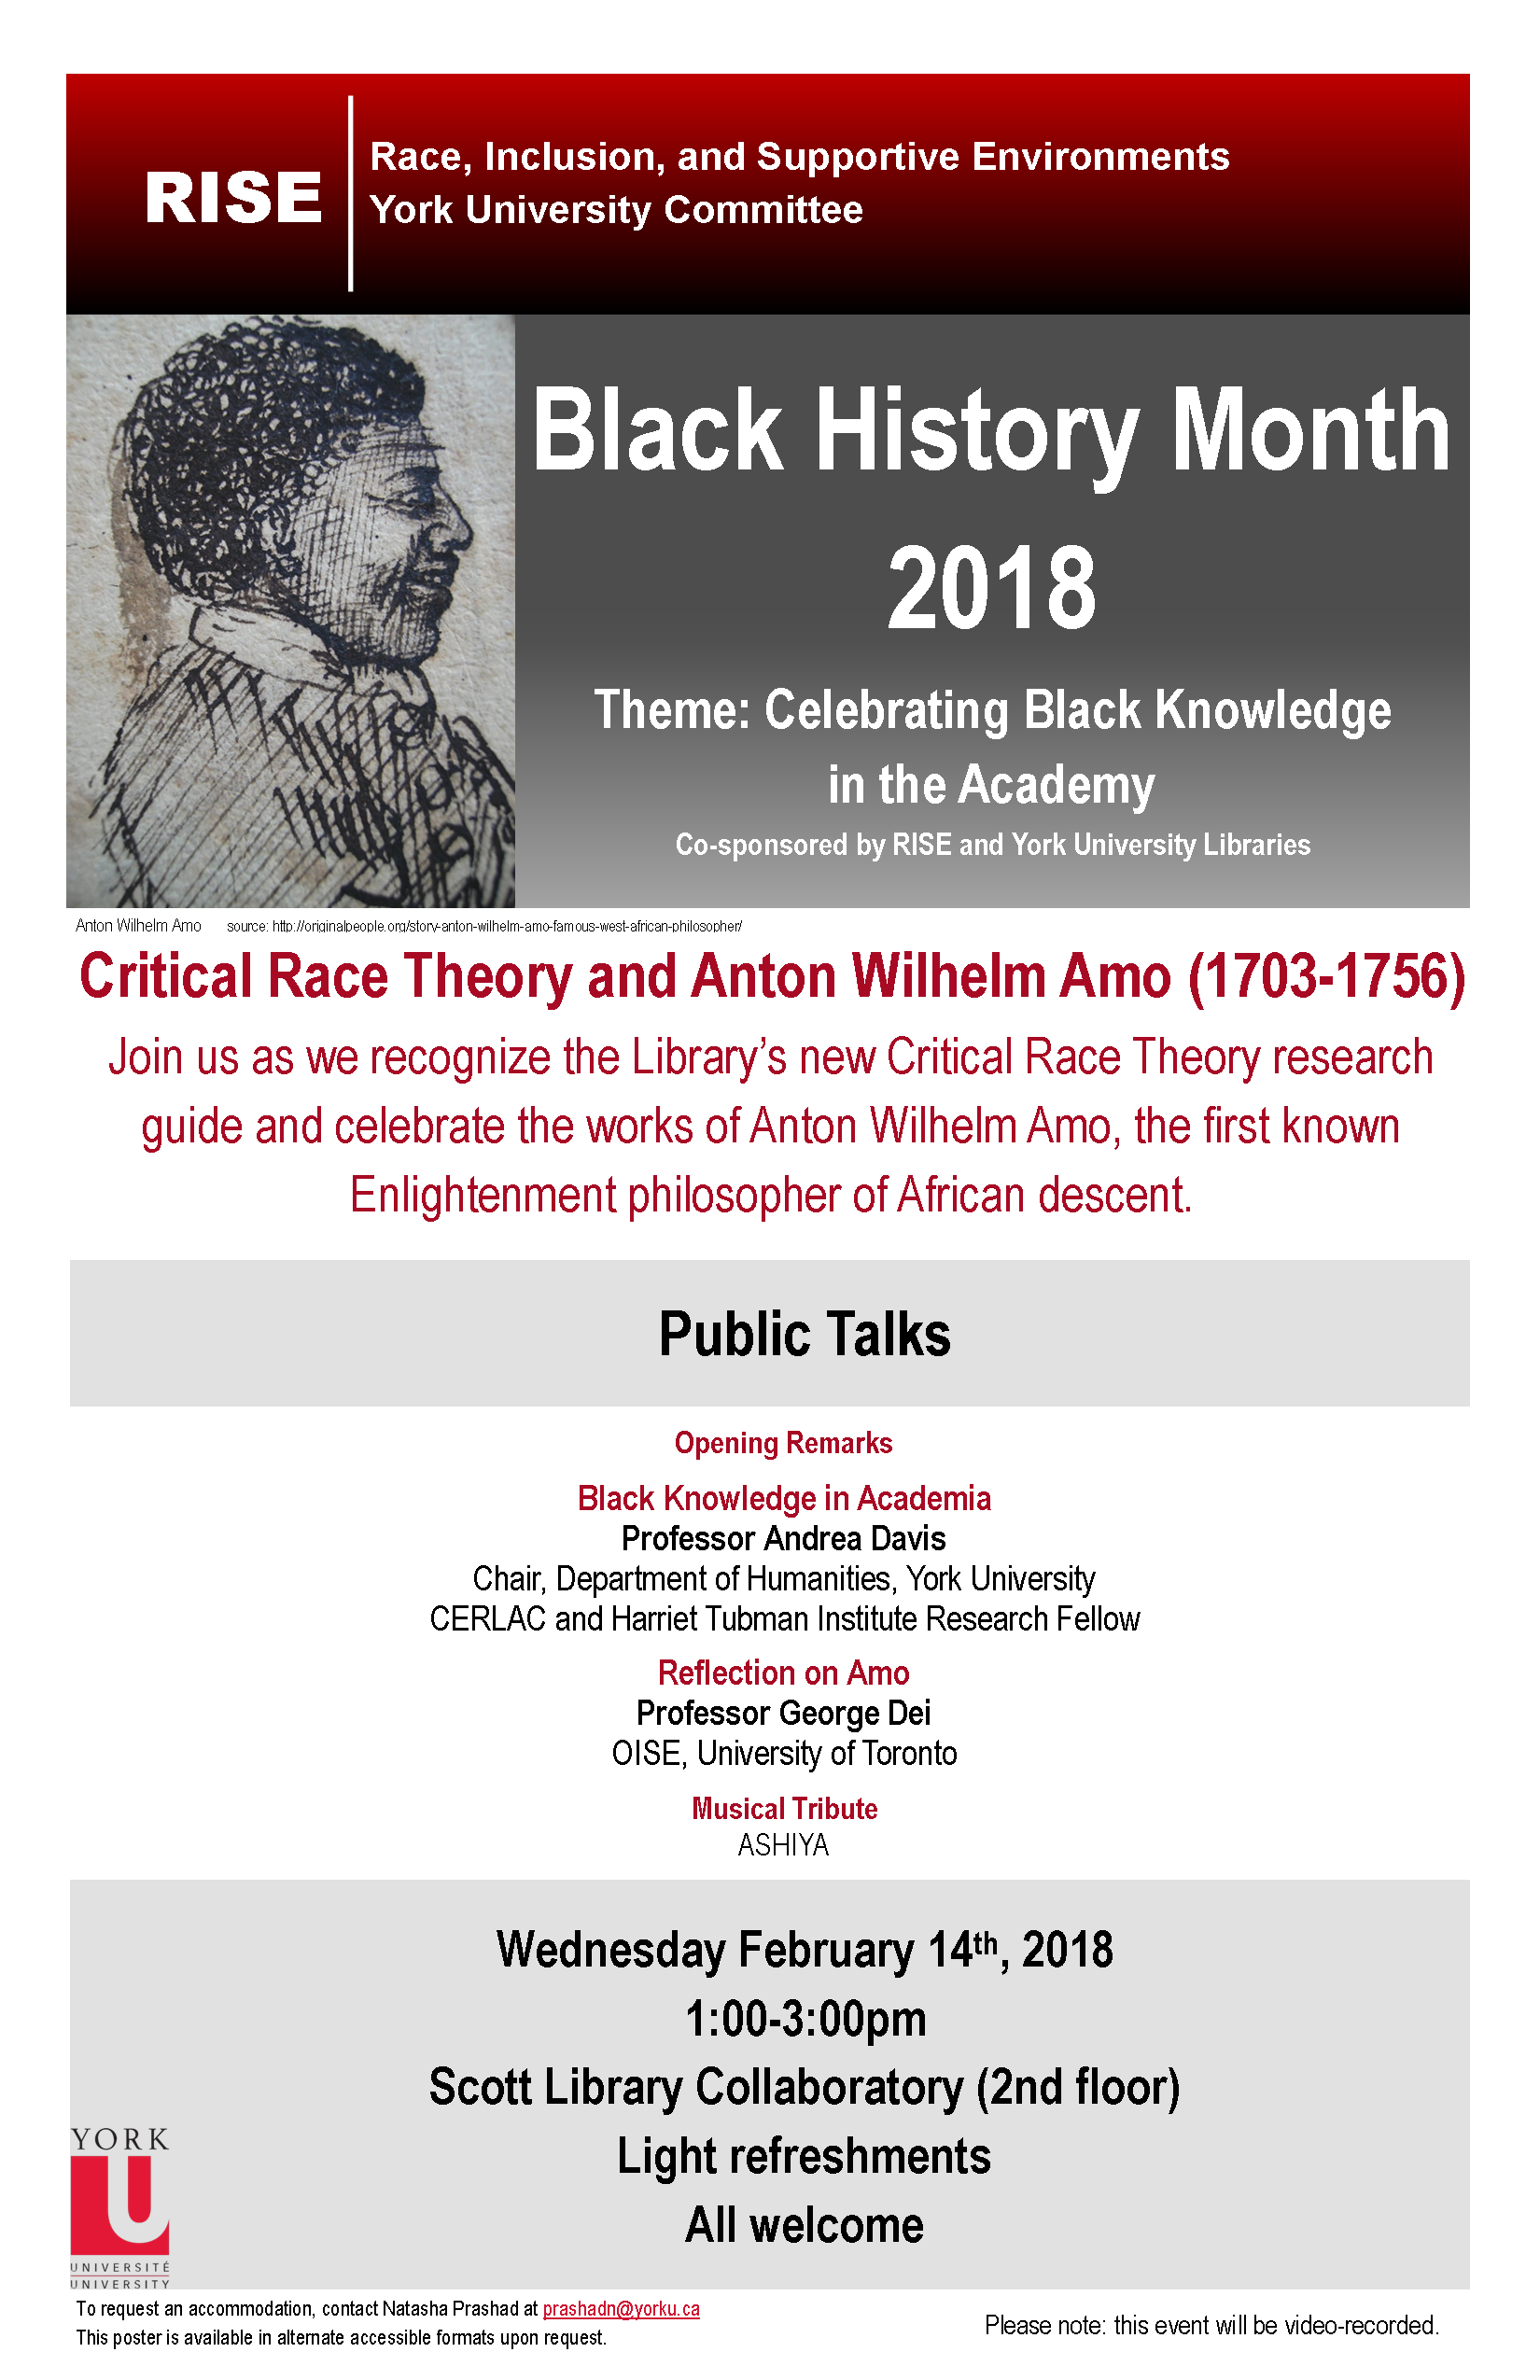 Header: RISE: Race, Inclusion, and Supportive Environments. York University Committee. To the left, a sketch of Amo. To the right, the text “Black History Month 2018. Theme: Celebrating Black Knowledge in the Academy. Co-sponsored by RISE and York University Libraries. Below, in red, the text: Critical Race Theory and Anton Wilhelm Amo (1703-1756). Join us as we recognize the Library’s new Critical Race Theory research guide and celebrate the works of Anton Wilhelm Amo, the first known Enlightenment philosopher of African descent. Below, a title header with the text “Public Talks” In this section the following text: Opening re marks. Then, Black Knowledge in Academia, Professor Andrea Davis, Chair, Department of Humanities, York University. CERLAC and Harriet Tubman Institute Research Fellow. Then, Reflection on Amo, Professor George Dei, OISE, University of Toronto. Then, Musical Tribute, ASHIYA. Below, a section block with the text: Wednesday February 14th, 2018.1:00-3:00pm.Scott Library Collaboratory (2nd floor).Light refreshments.All welcome Below, in the footer on the left side is, the York University logo and the text: To request an accommodation, contact Natasha Prashad at prashadn@yorku.ca. This poster is available in alternate accessible formats upon request. On the right side of the footer is the text Please note: this event will be video-recorded.